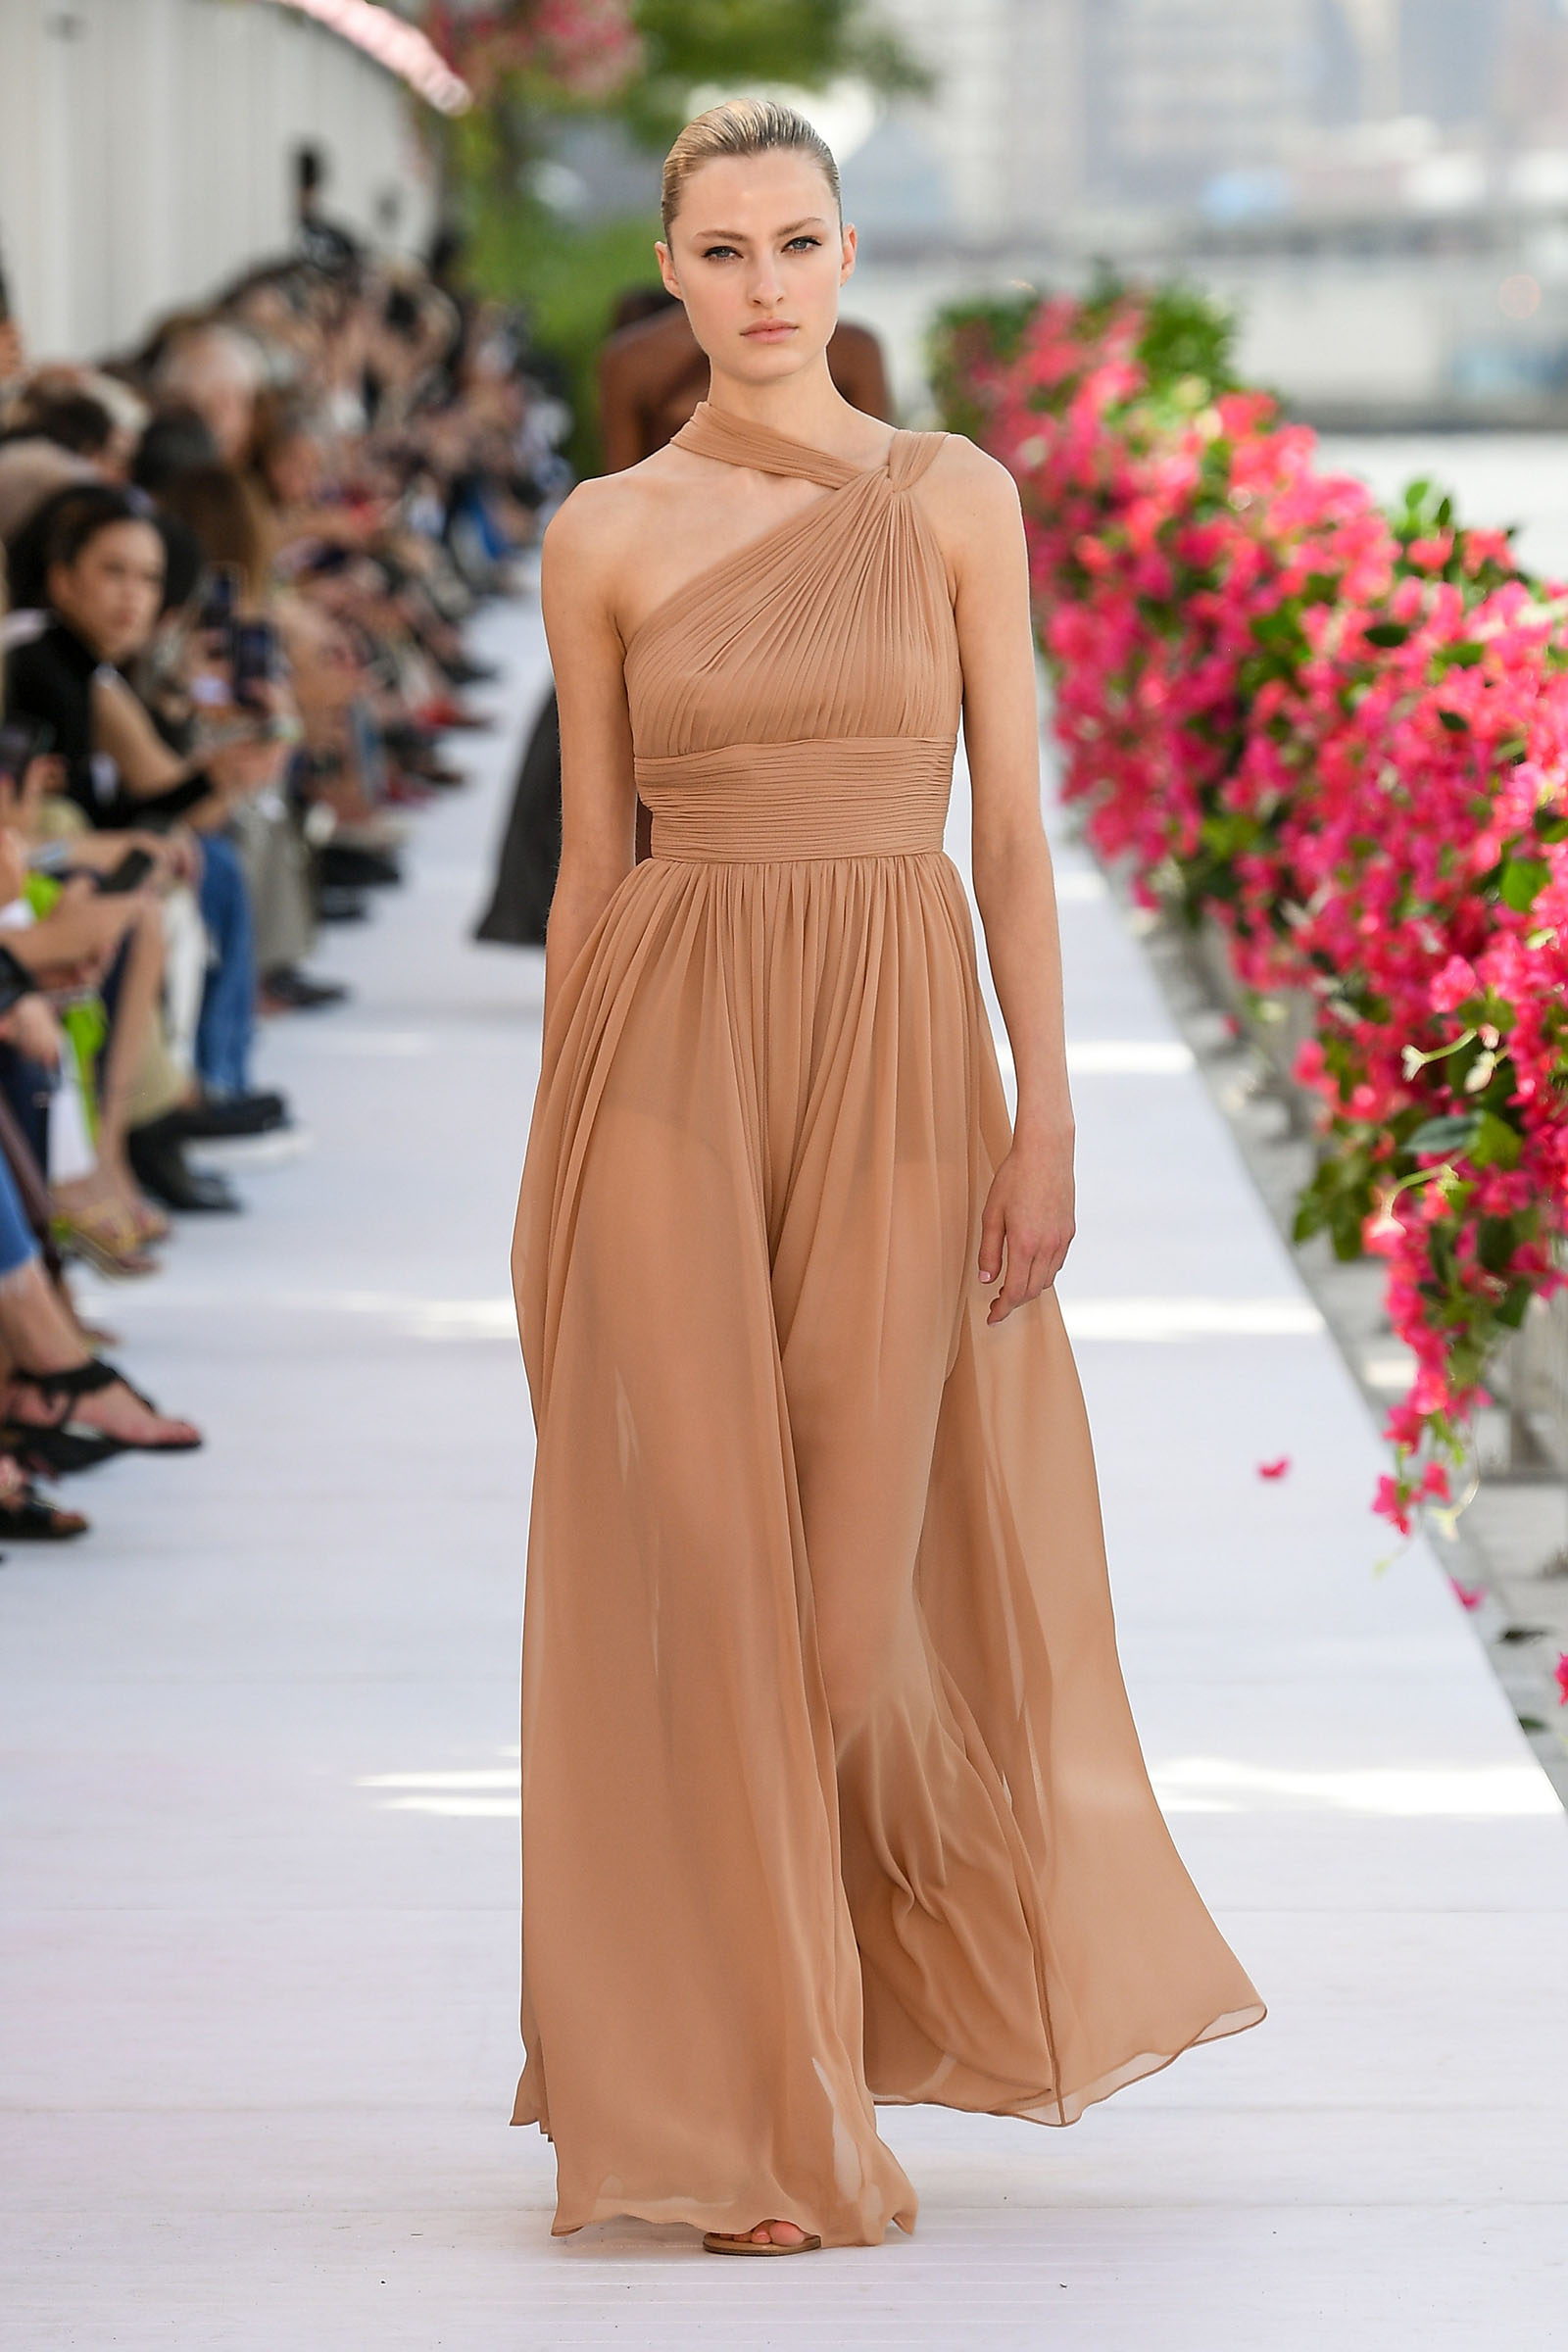 Michael Kors' Spring/Summer 2024 Ready-To-Wear Collection